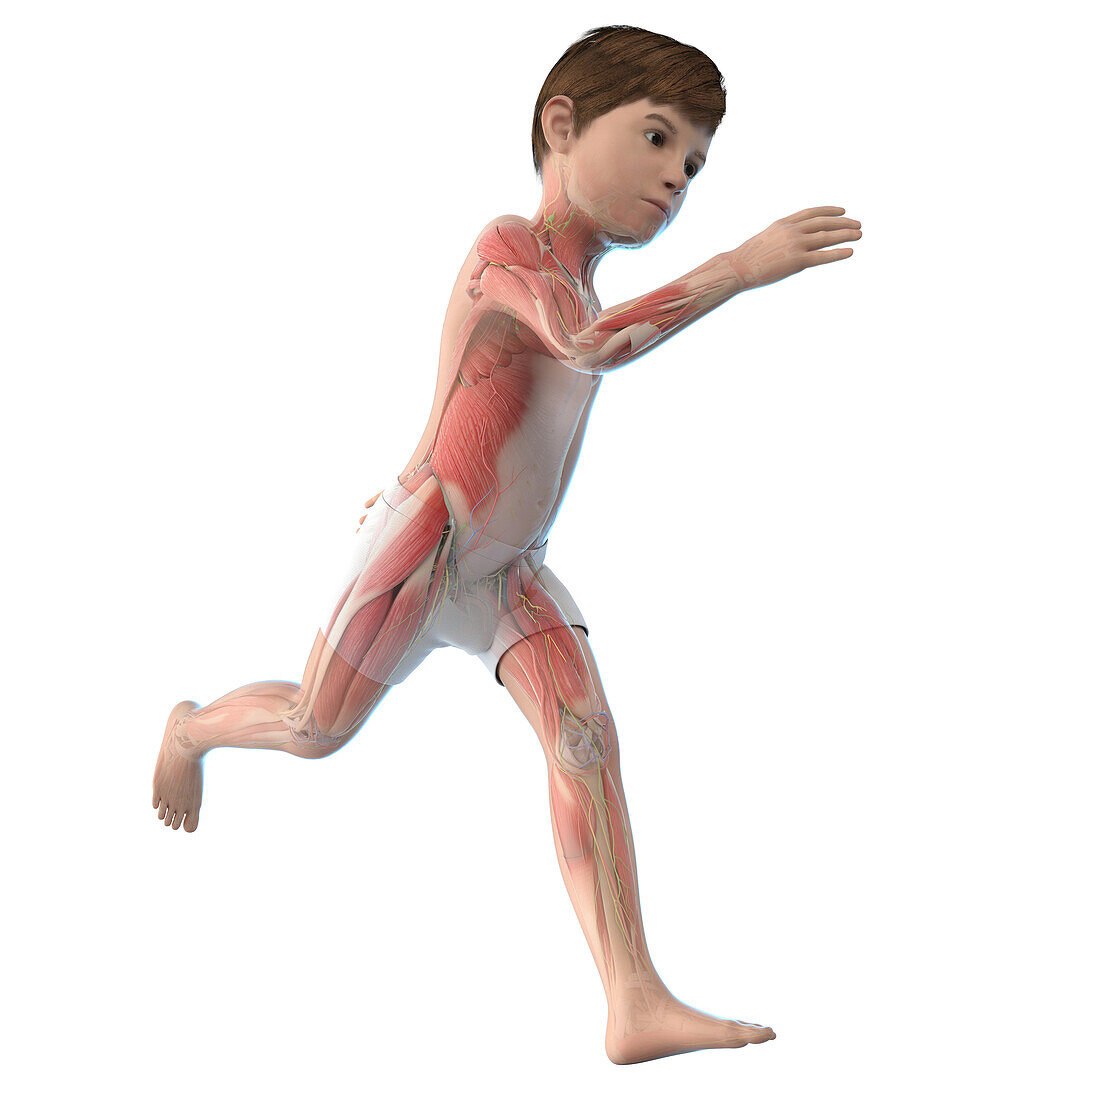 Illustration of a boy's muscles